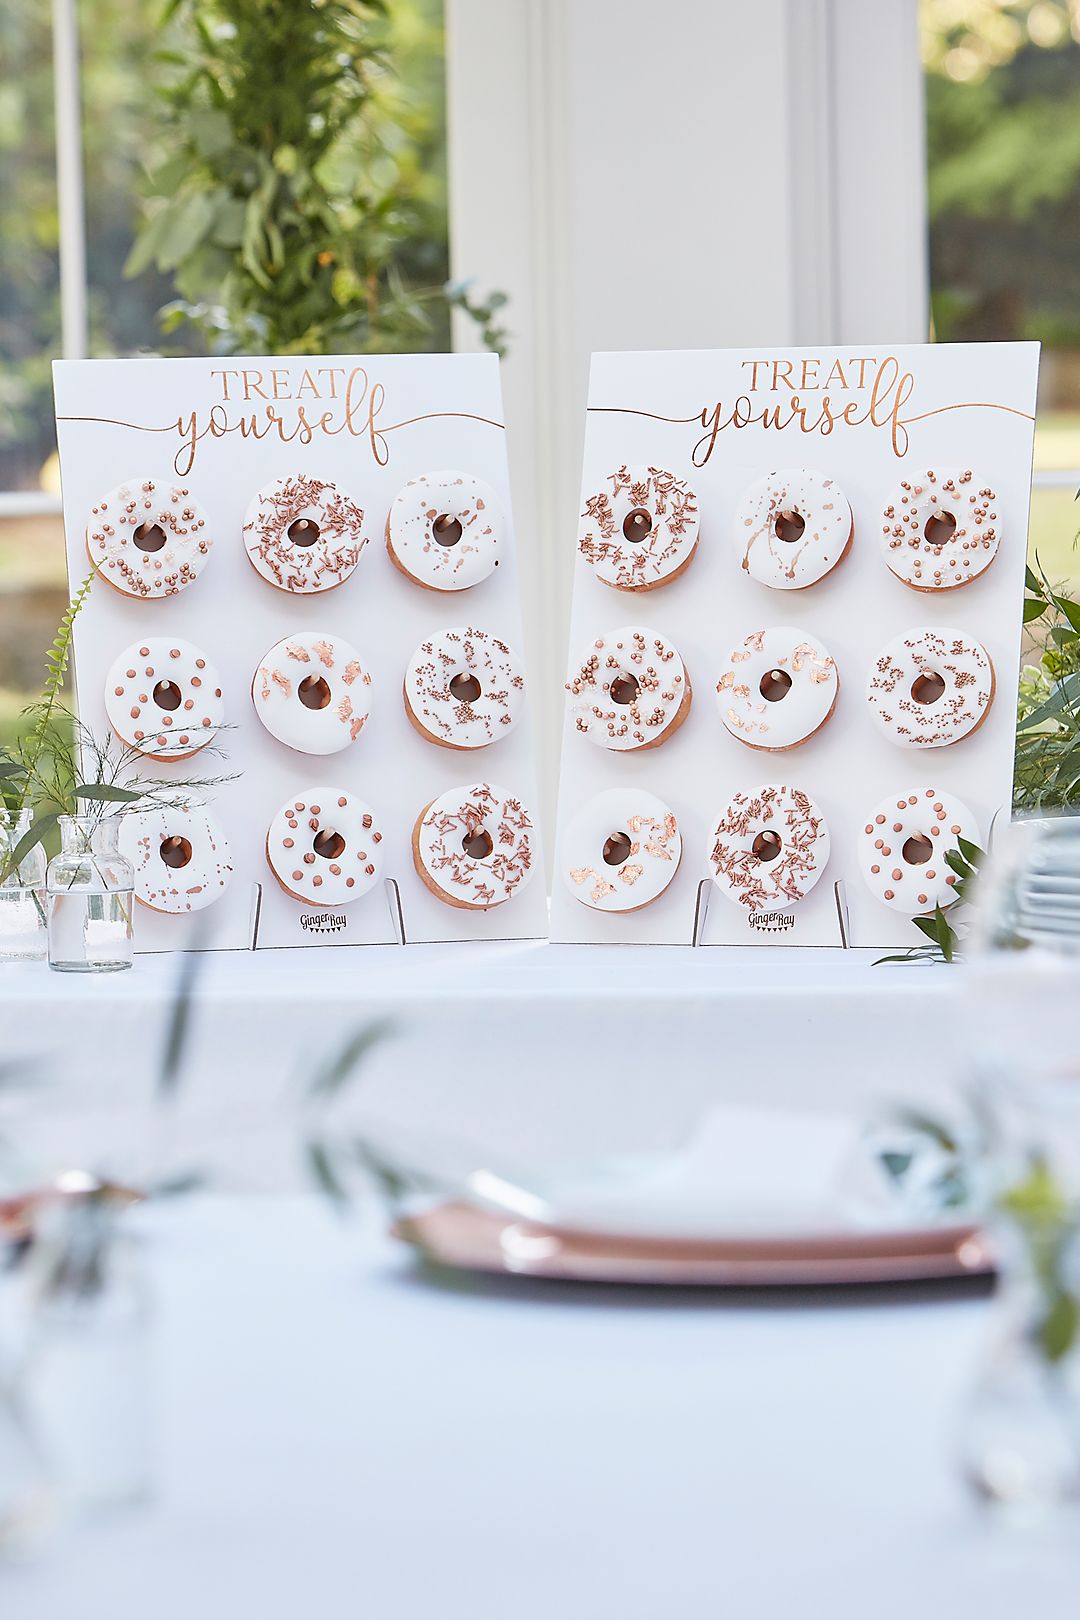 Rose Gold Treat Yourself Donut Wall Set Image 2